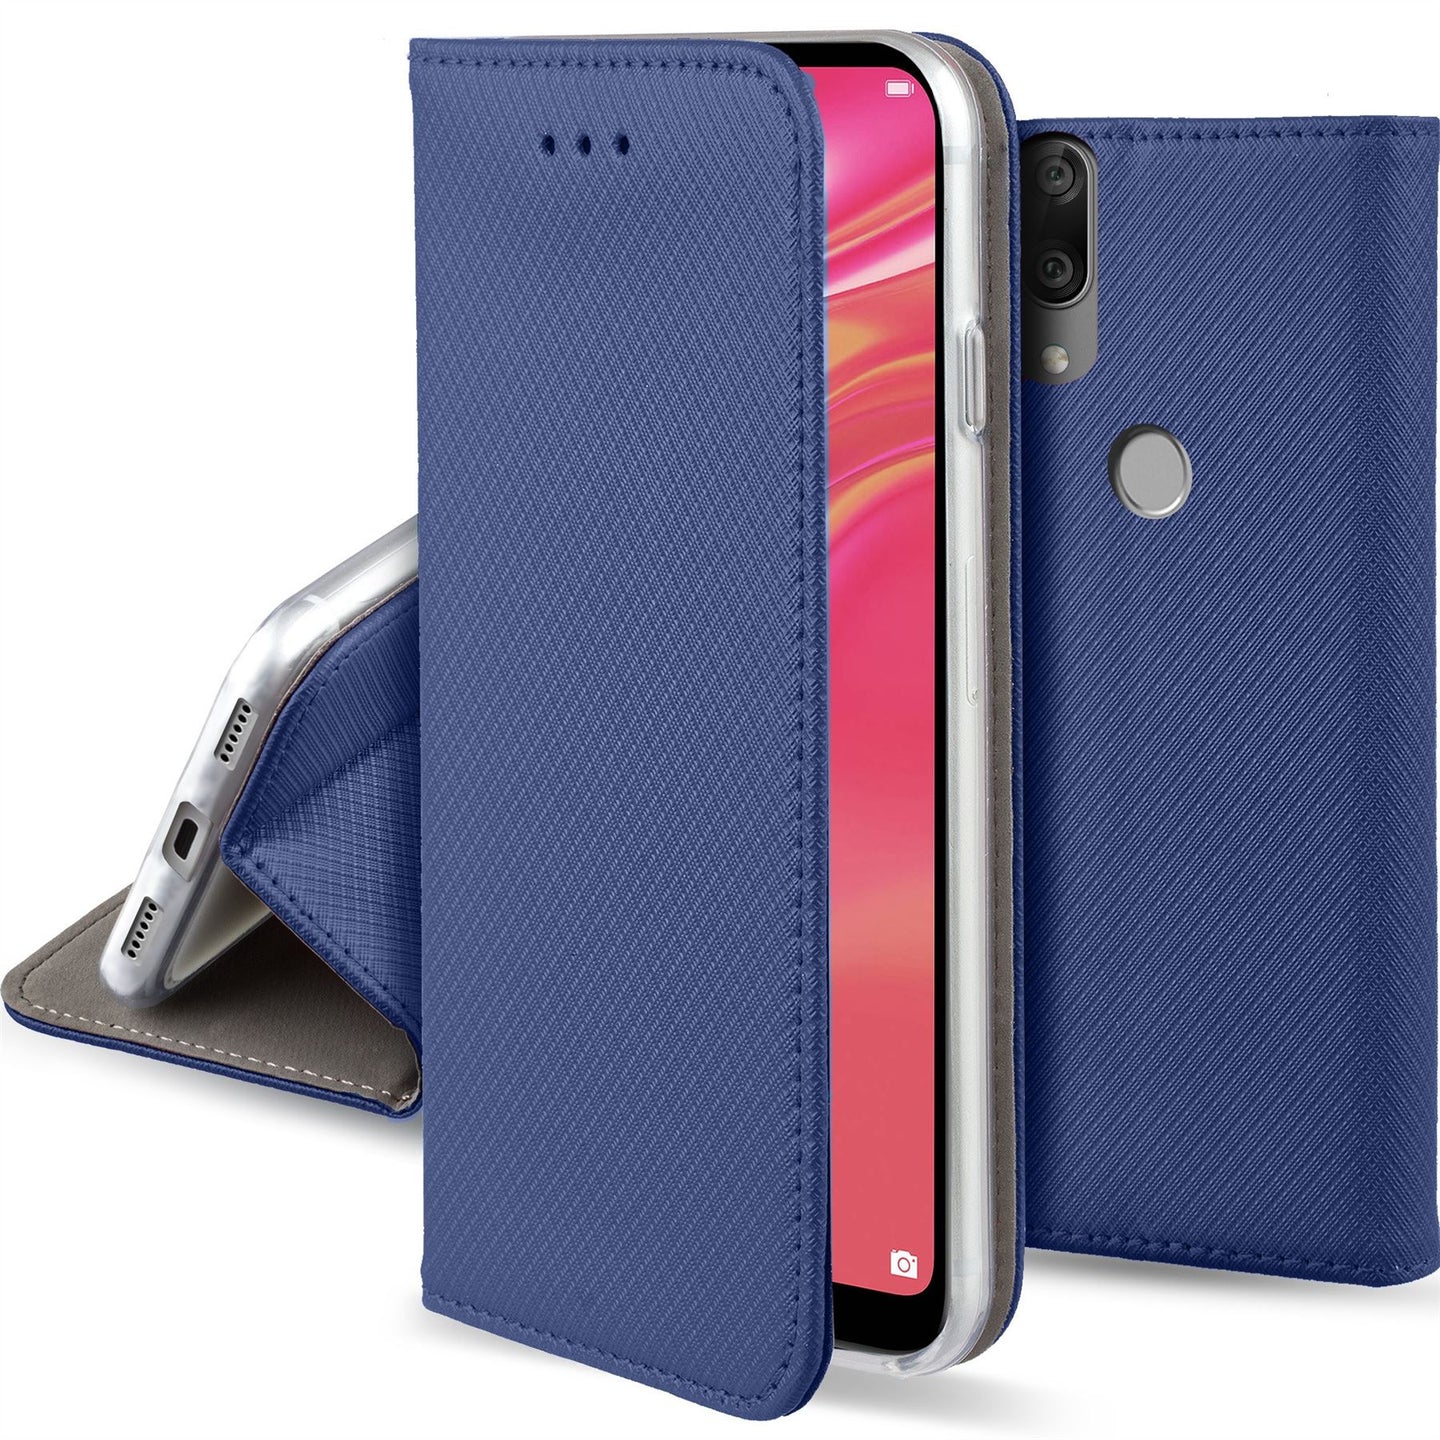 Moozy Case Flip Cover for Huawei Y7 2019, Huawei Y7 Prime 2019, Dark Blue - Smart Magnetic Flip Case with Card Holder and Stand